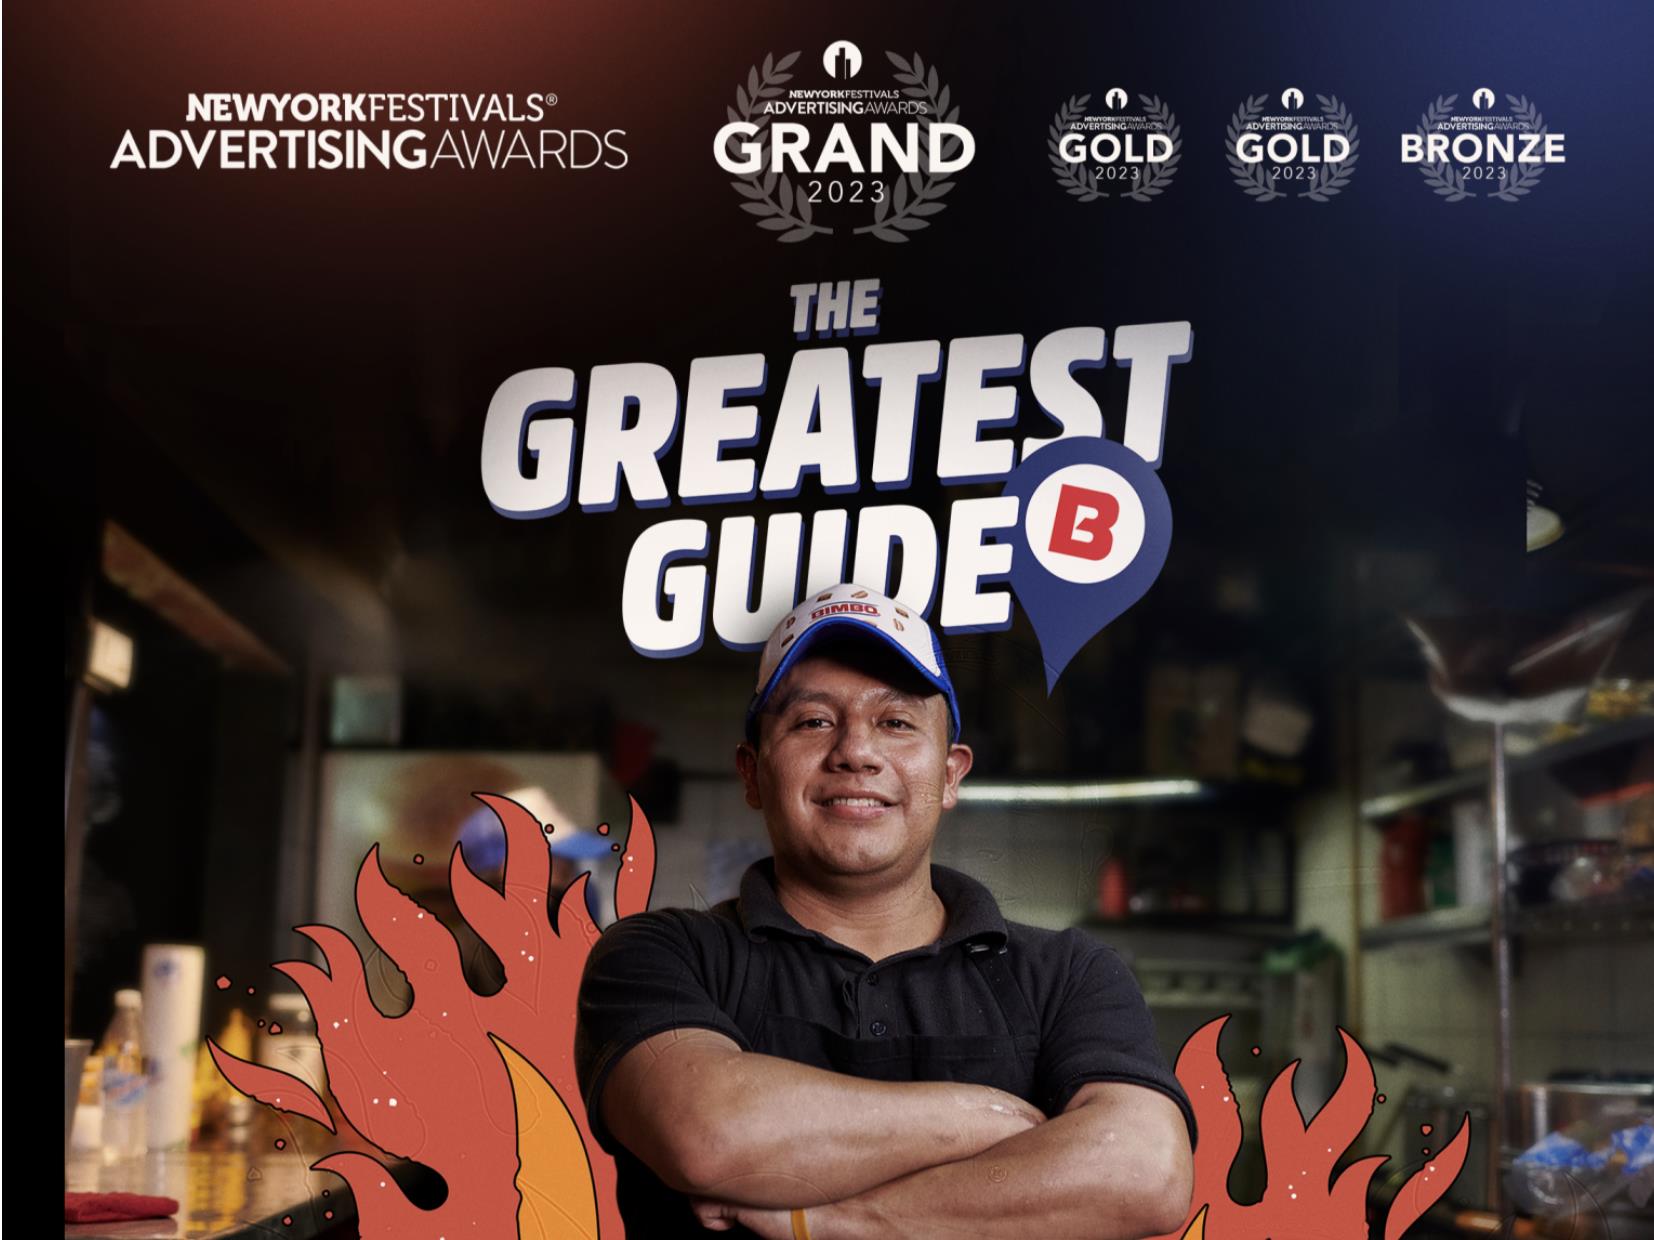 The Greatest Guide Takes Home a Grand Prix from the NY Festivals – Performance Art